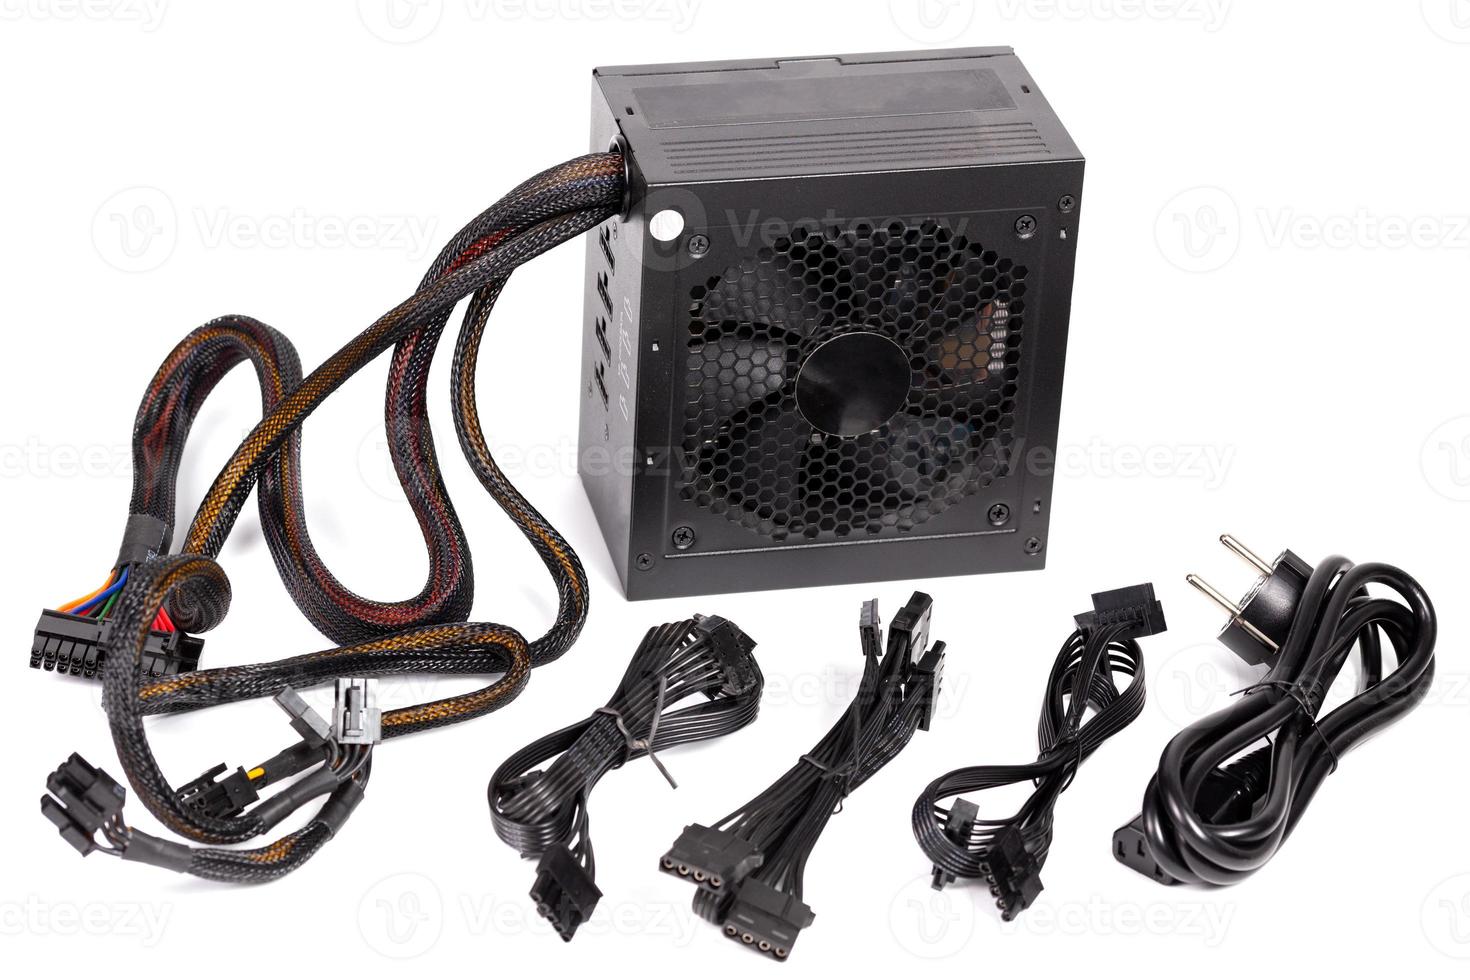 pc atx half-modular power supply isolated on white background with selective focus photo